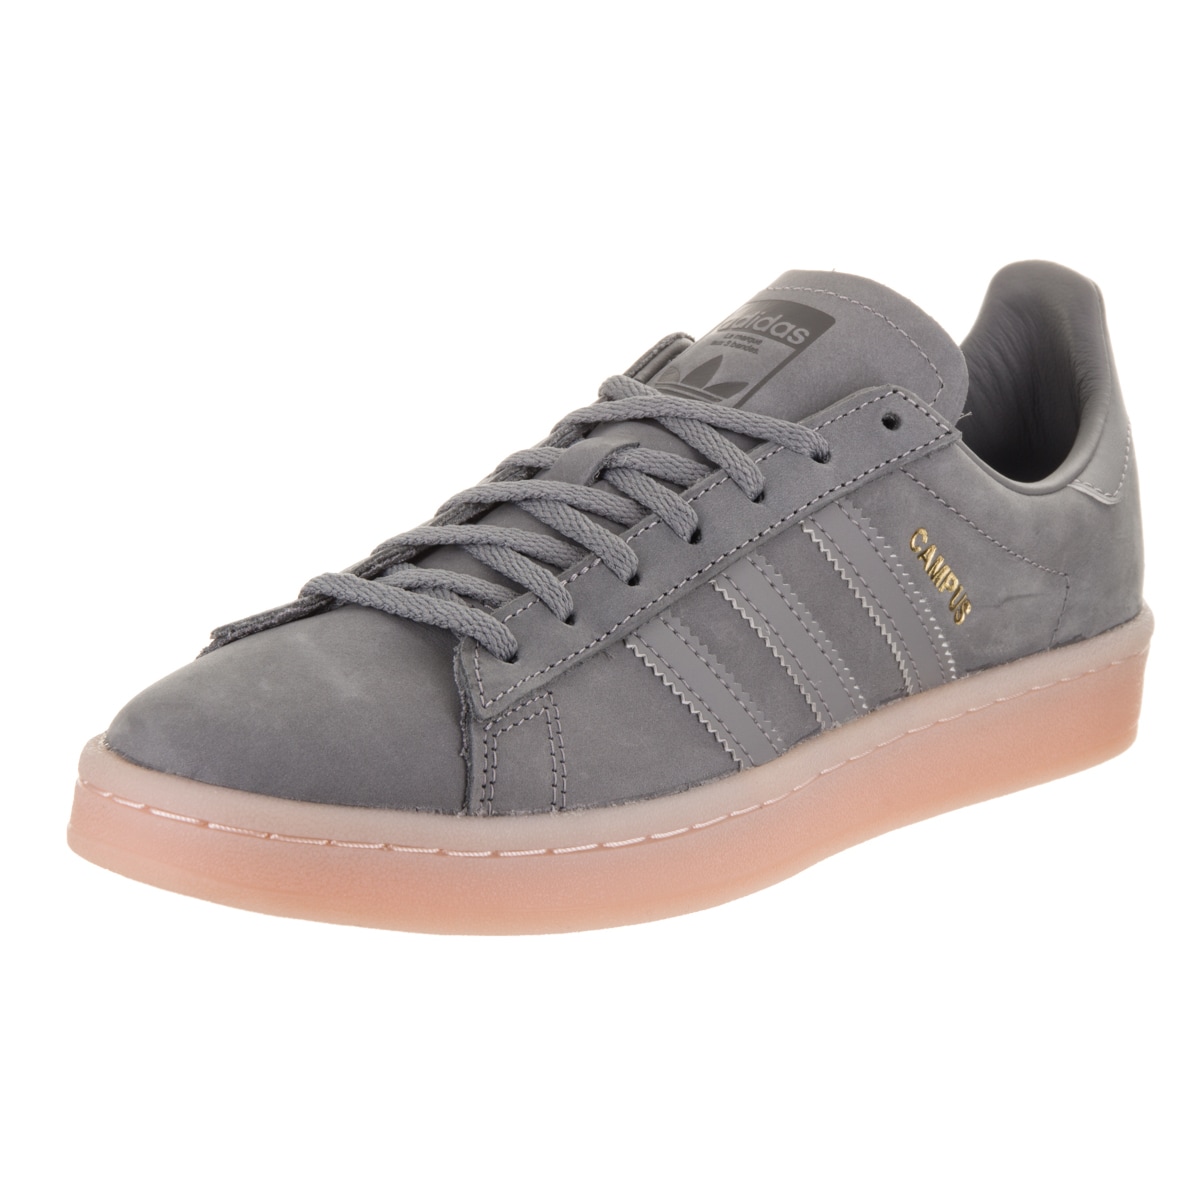 women's campus adidas shoes